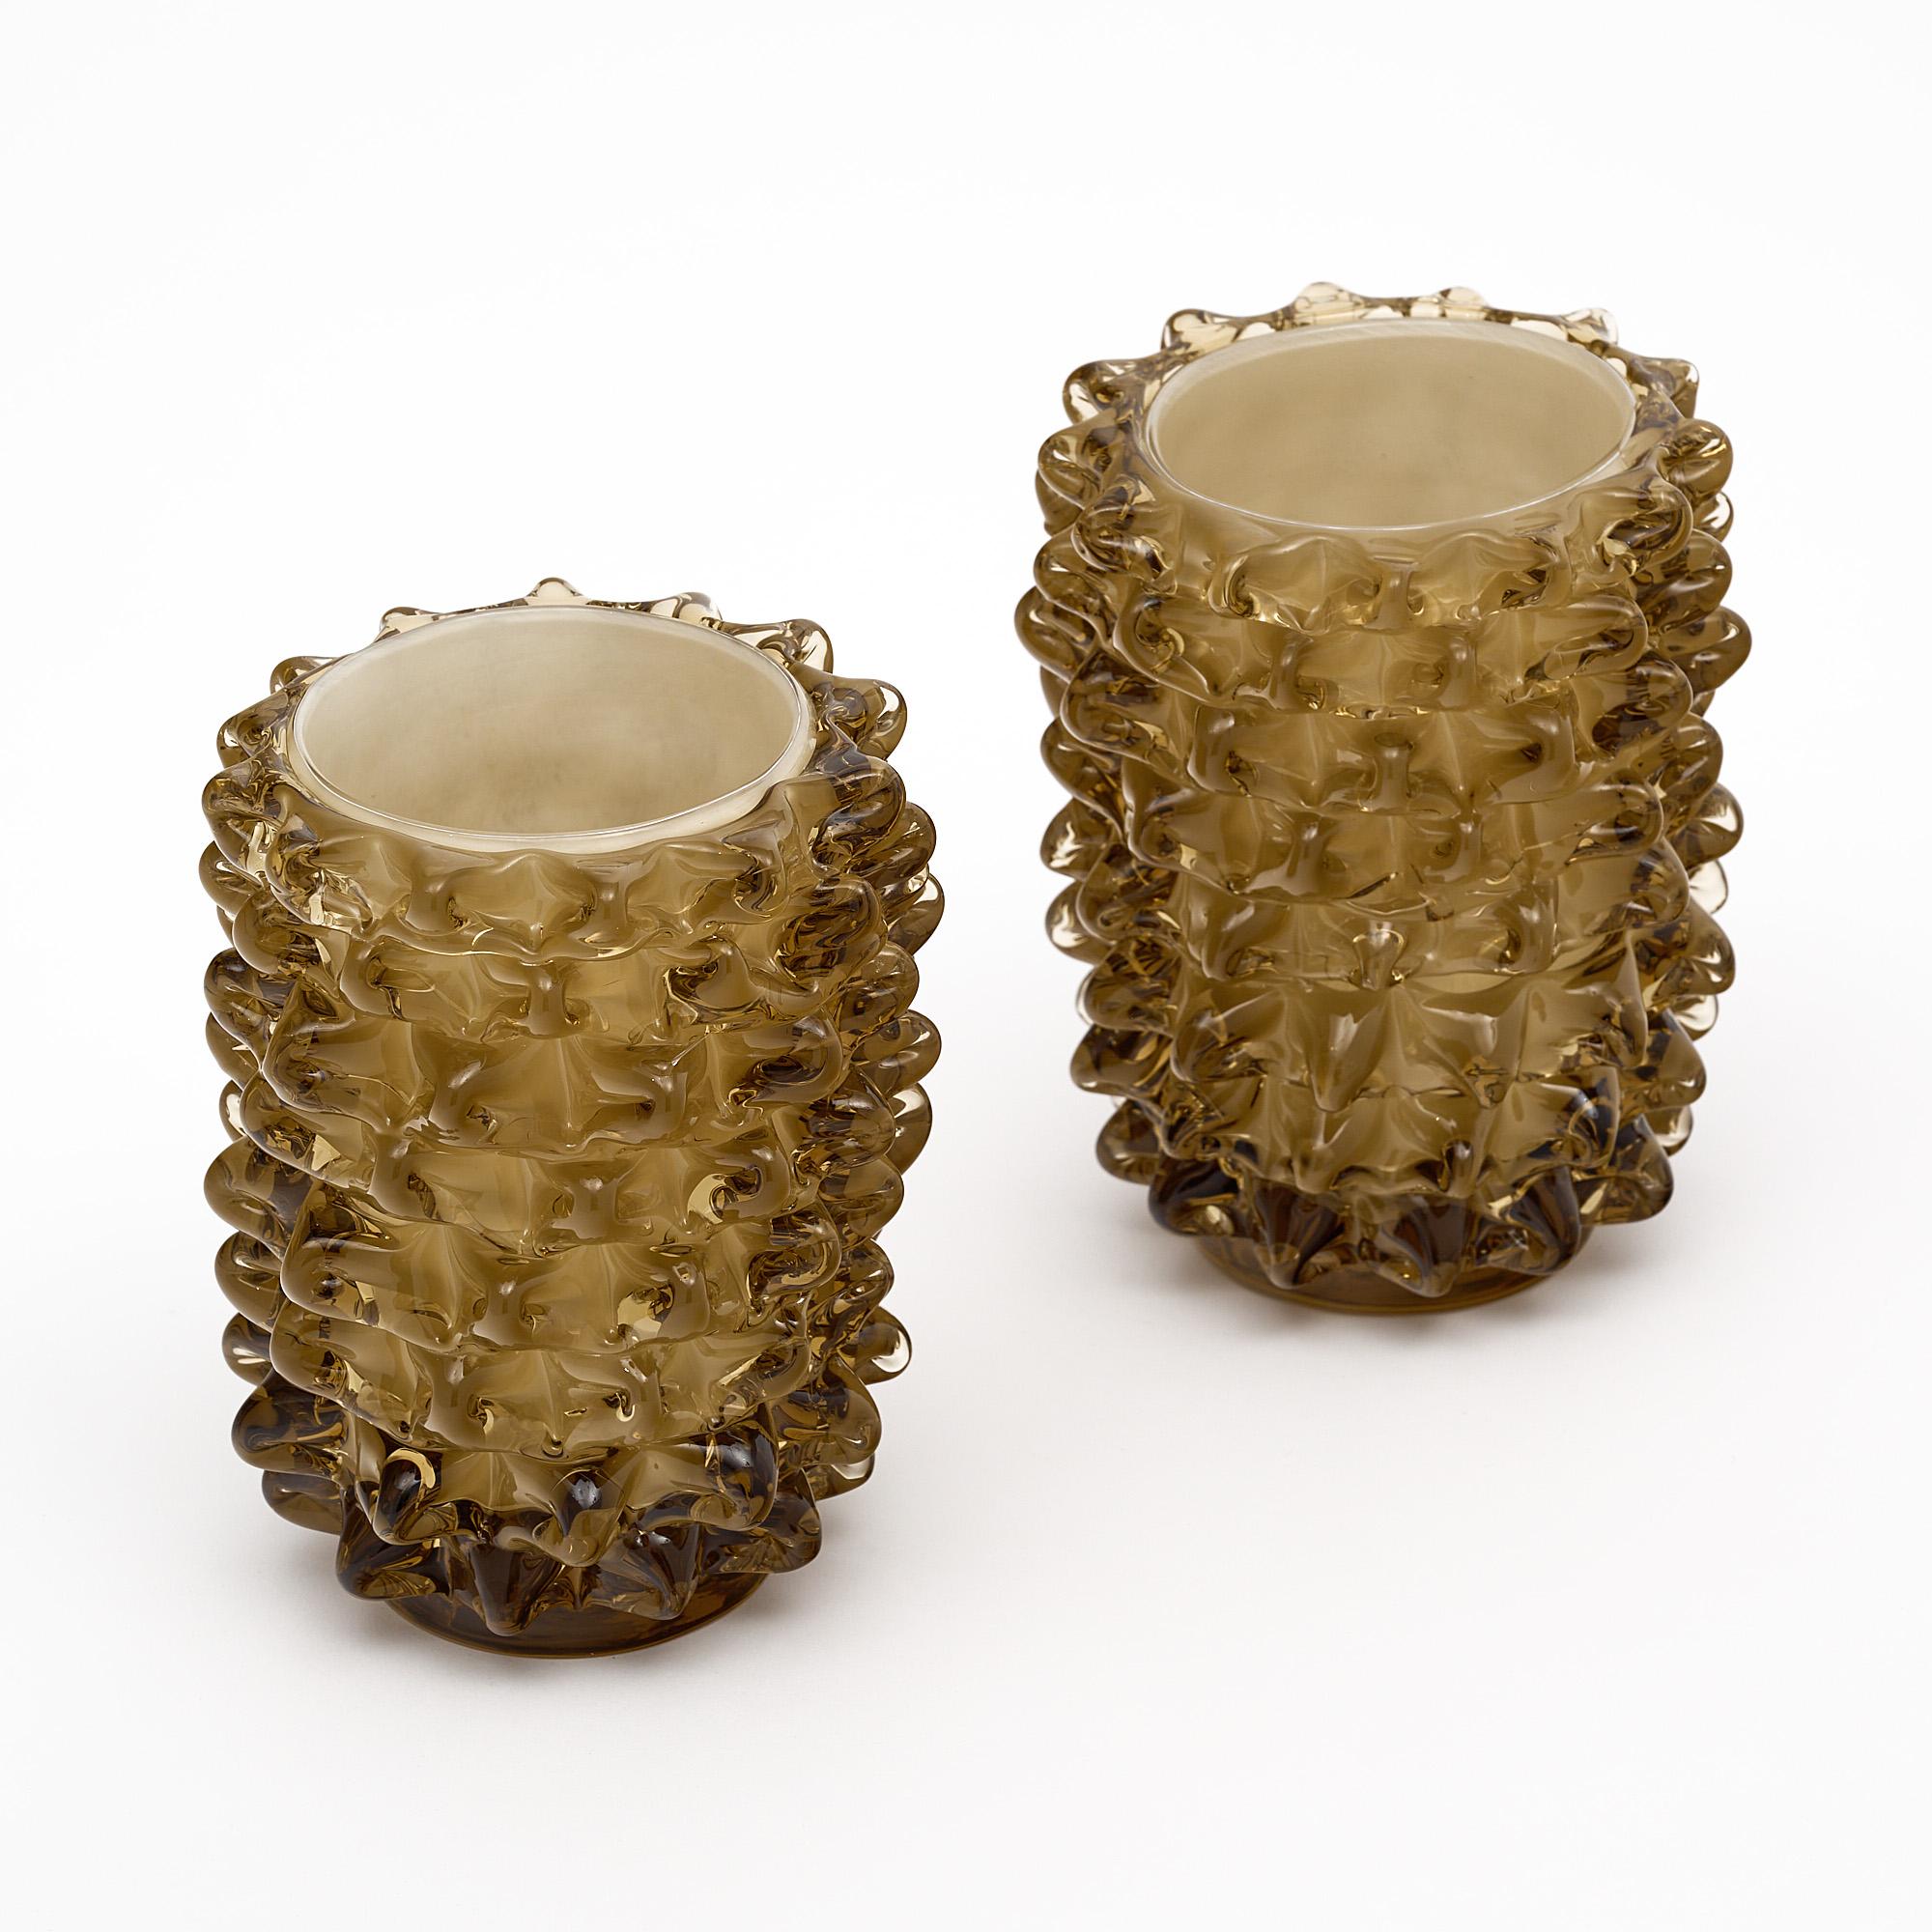 Pair of Murano glass vases, Italian, from the island of Murano. This hand-blown pair has a lovely taupe color and is made with the rostrate technique.